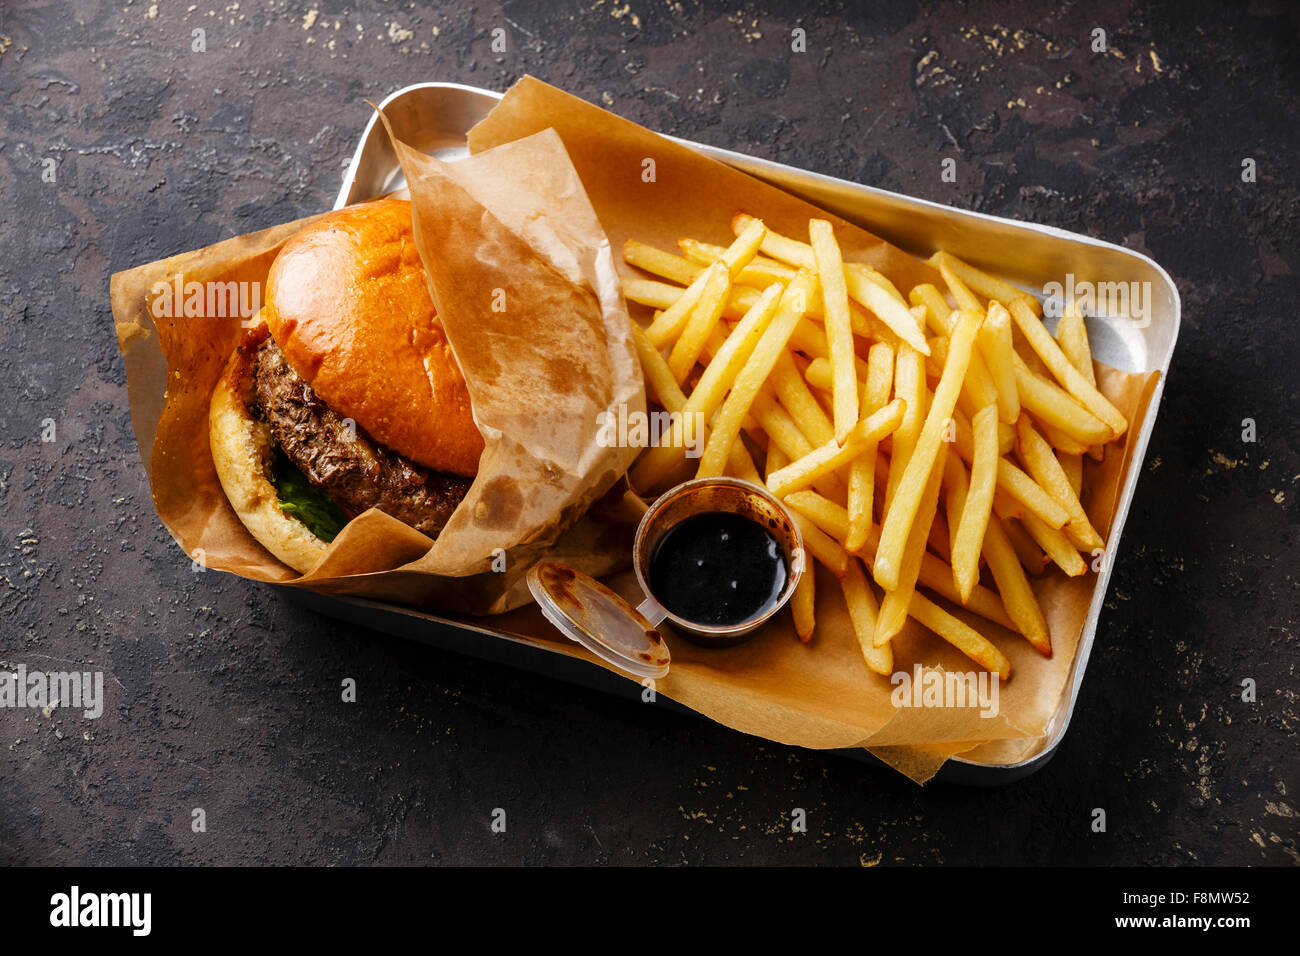 Burger with meat and French fries in aluminum tray on dark background Stock Photo